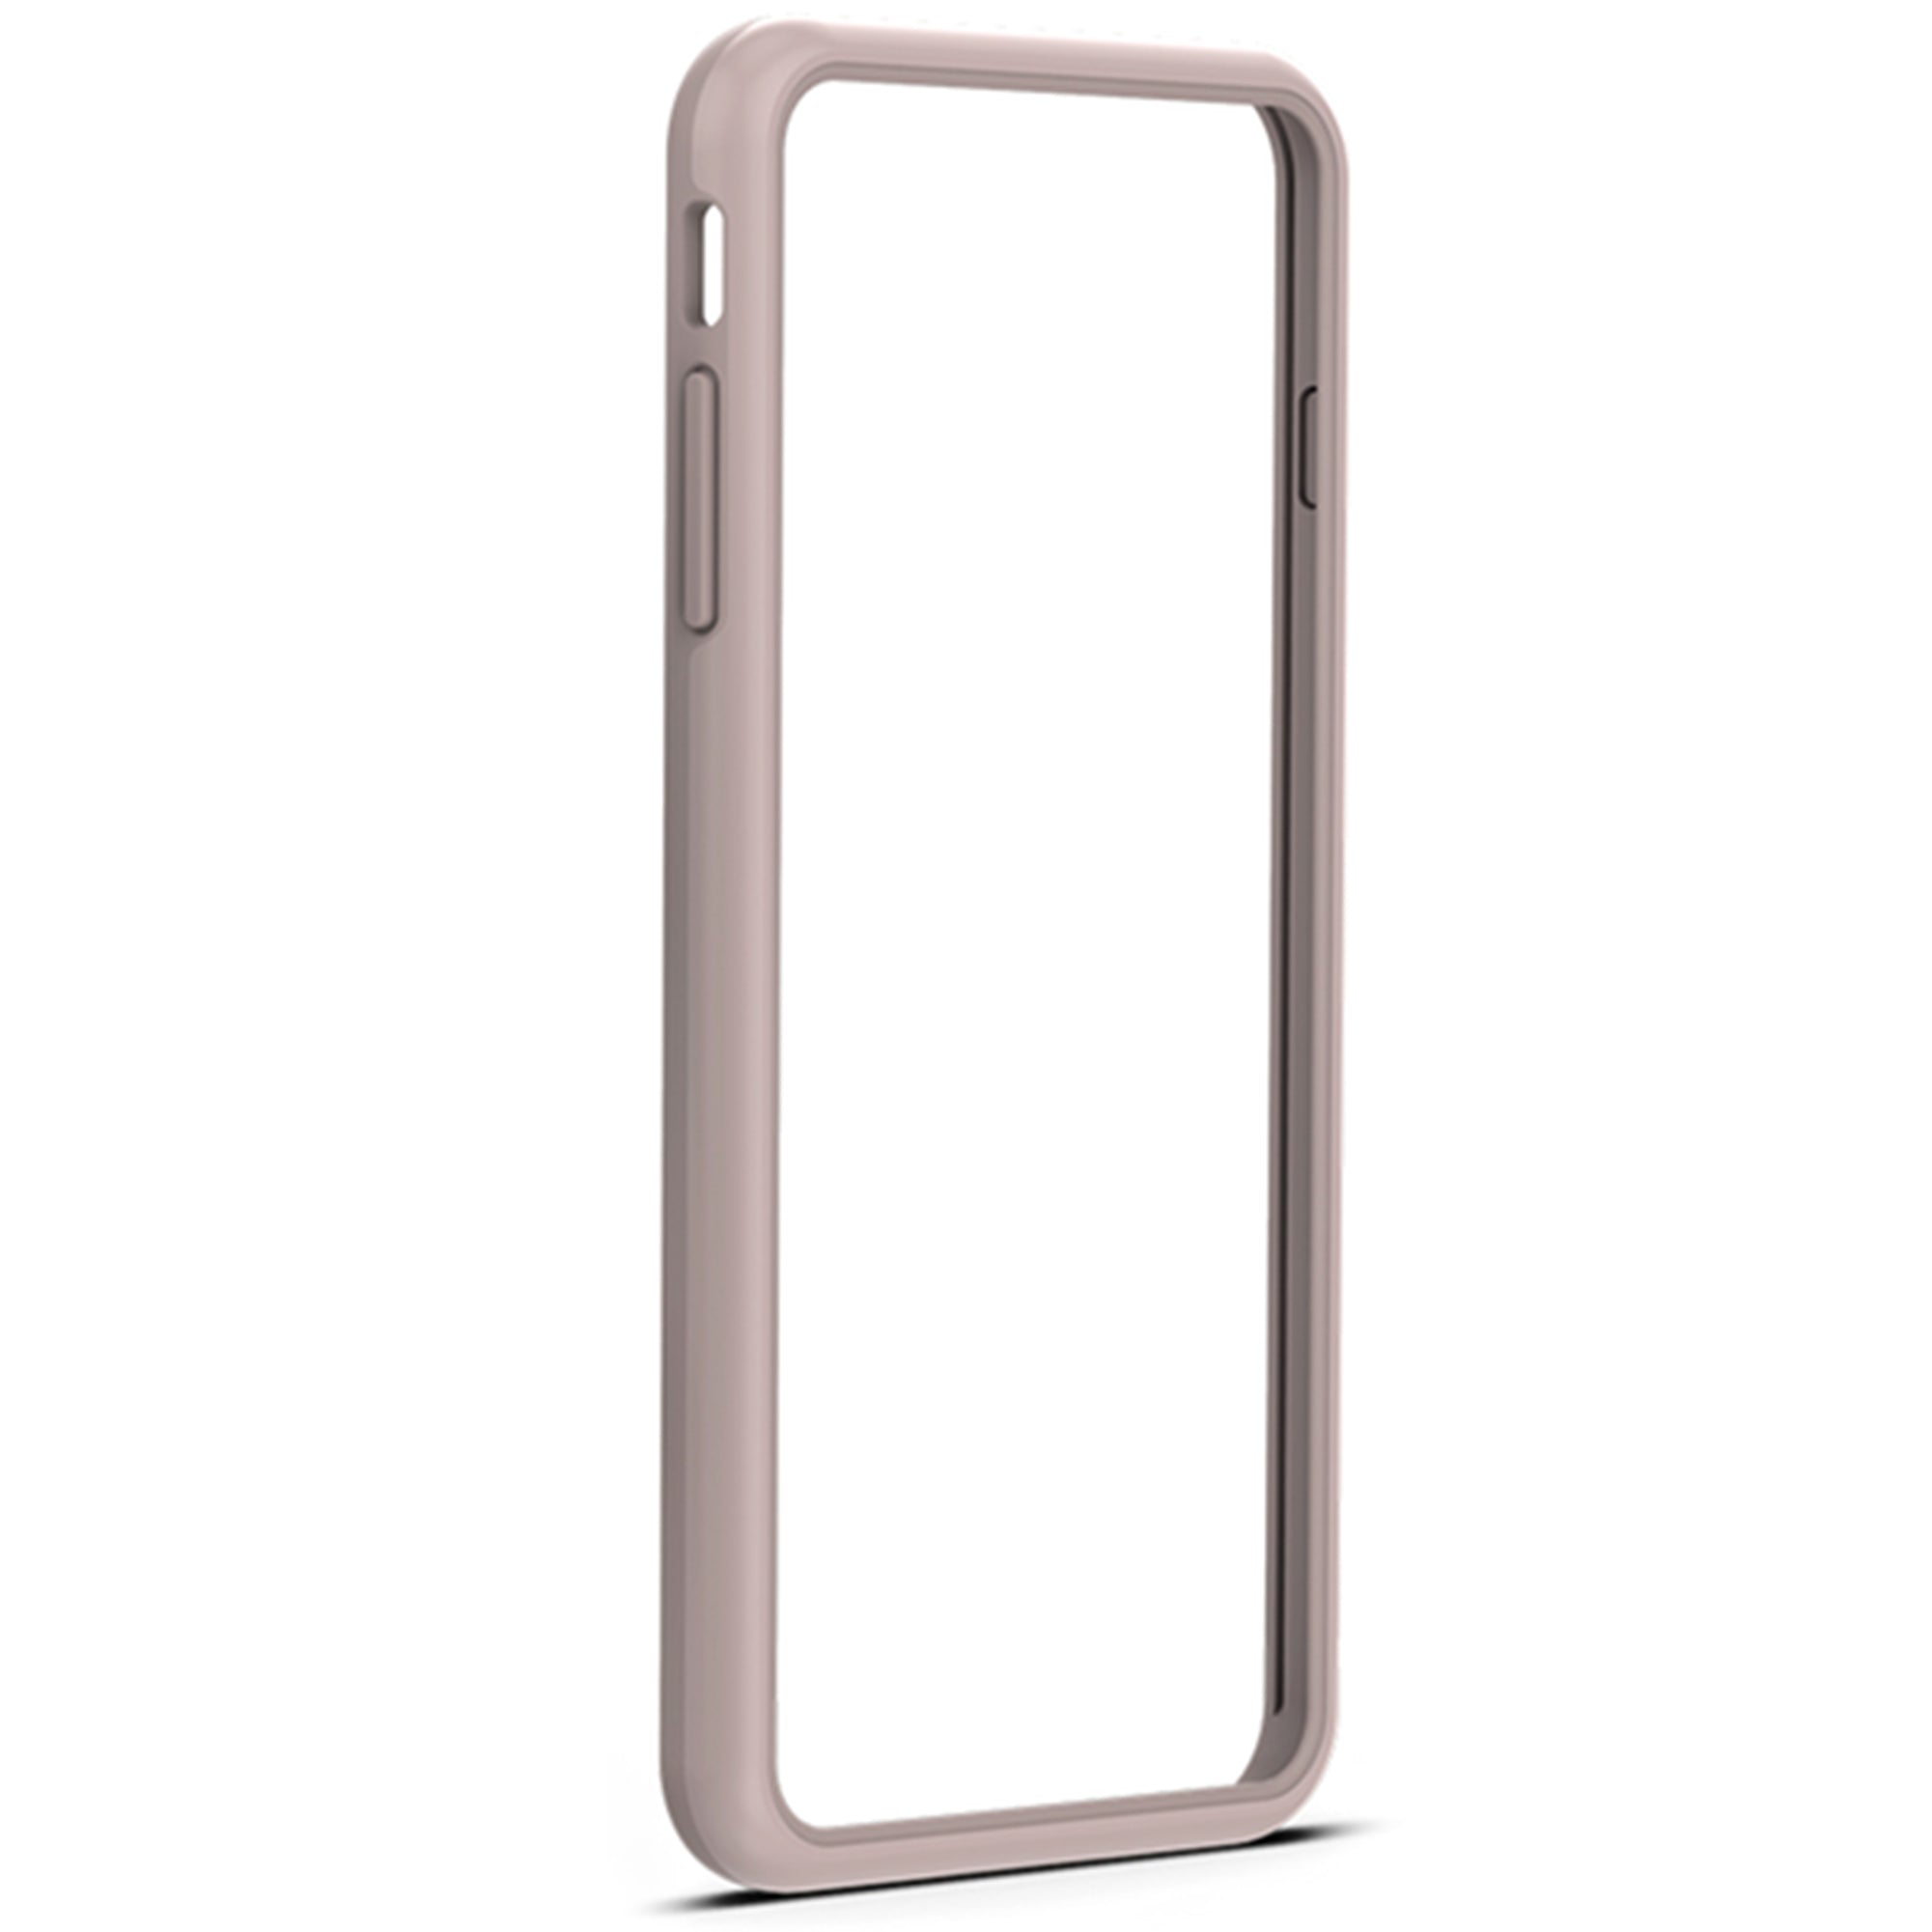 Extra Single Bumper Frames for iPhone 7 & 8 Battery Case (BX170)